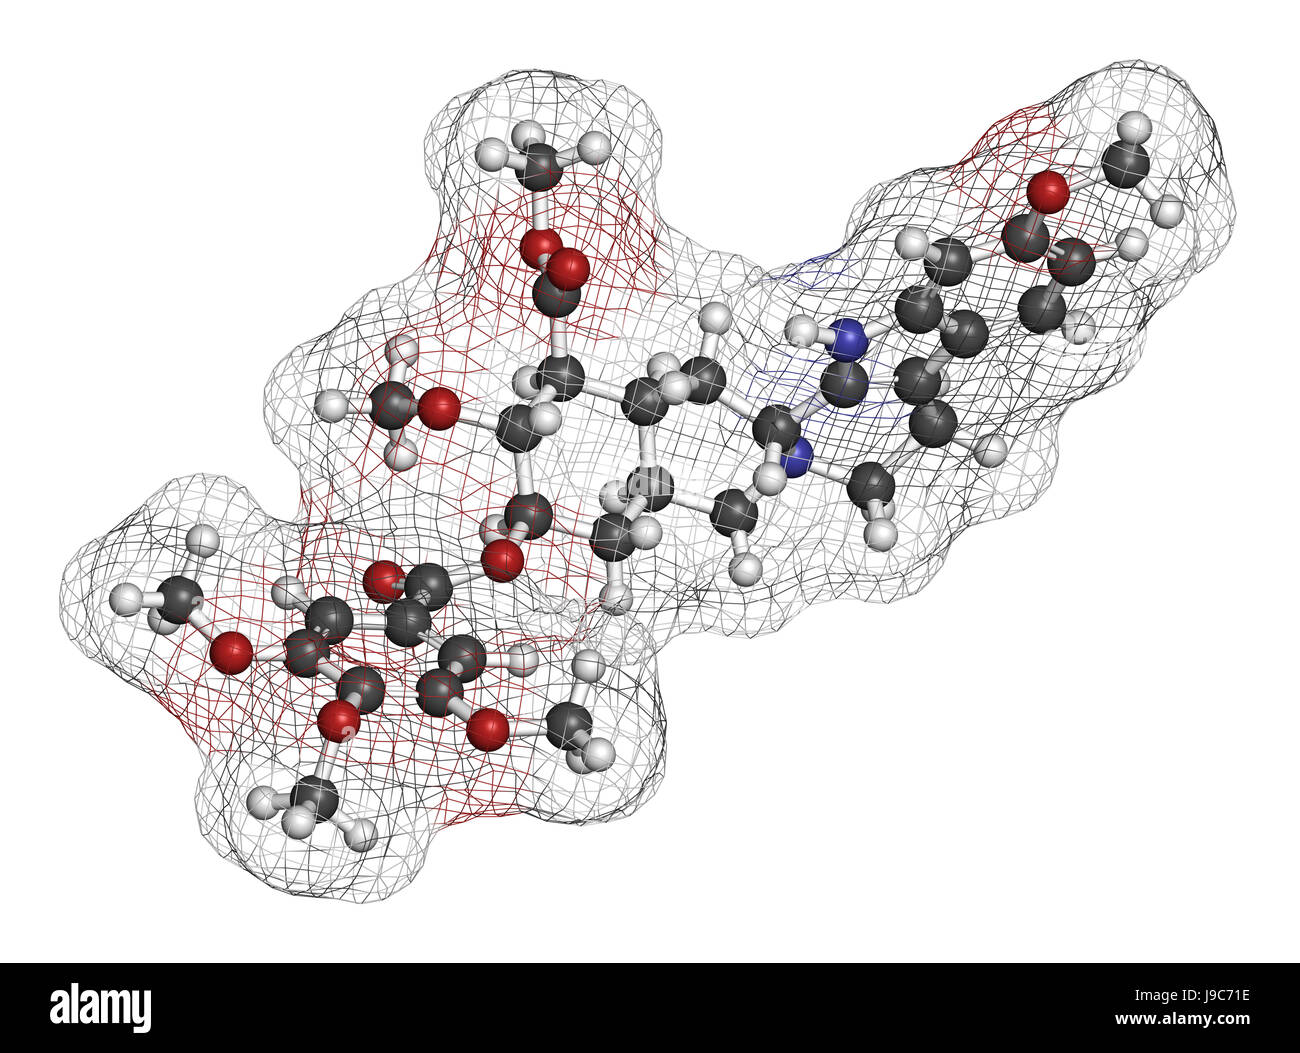 Reserpine alkaloid molecule. Isolated from Rauwolfia serpentina (Indian snakeroot). 3D rendering. Stock Photo